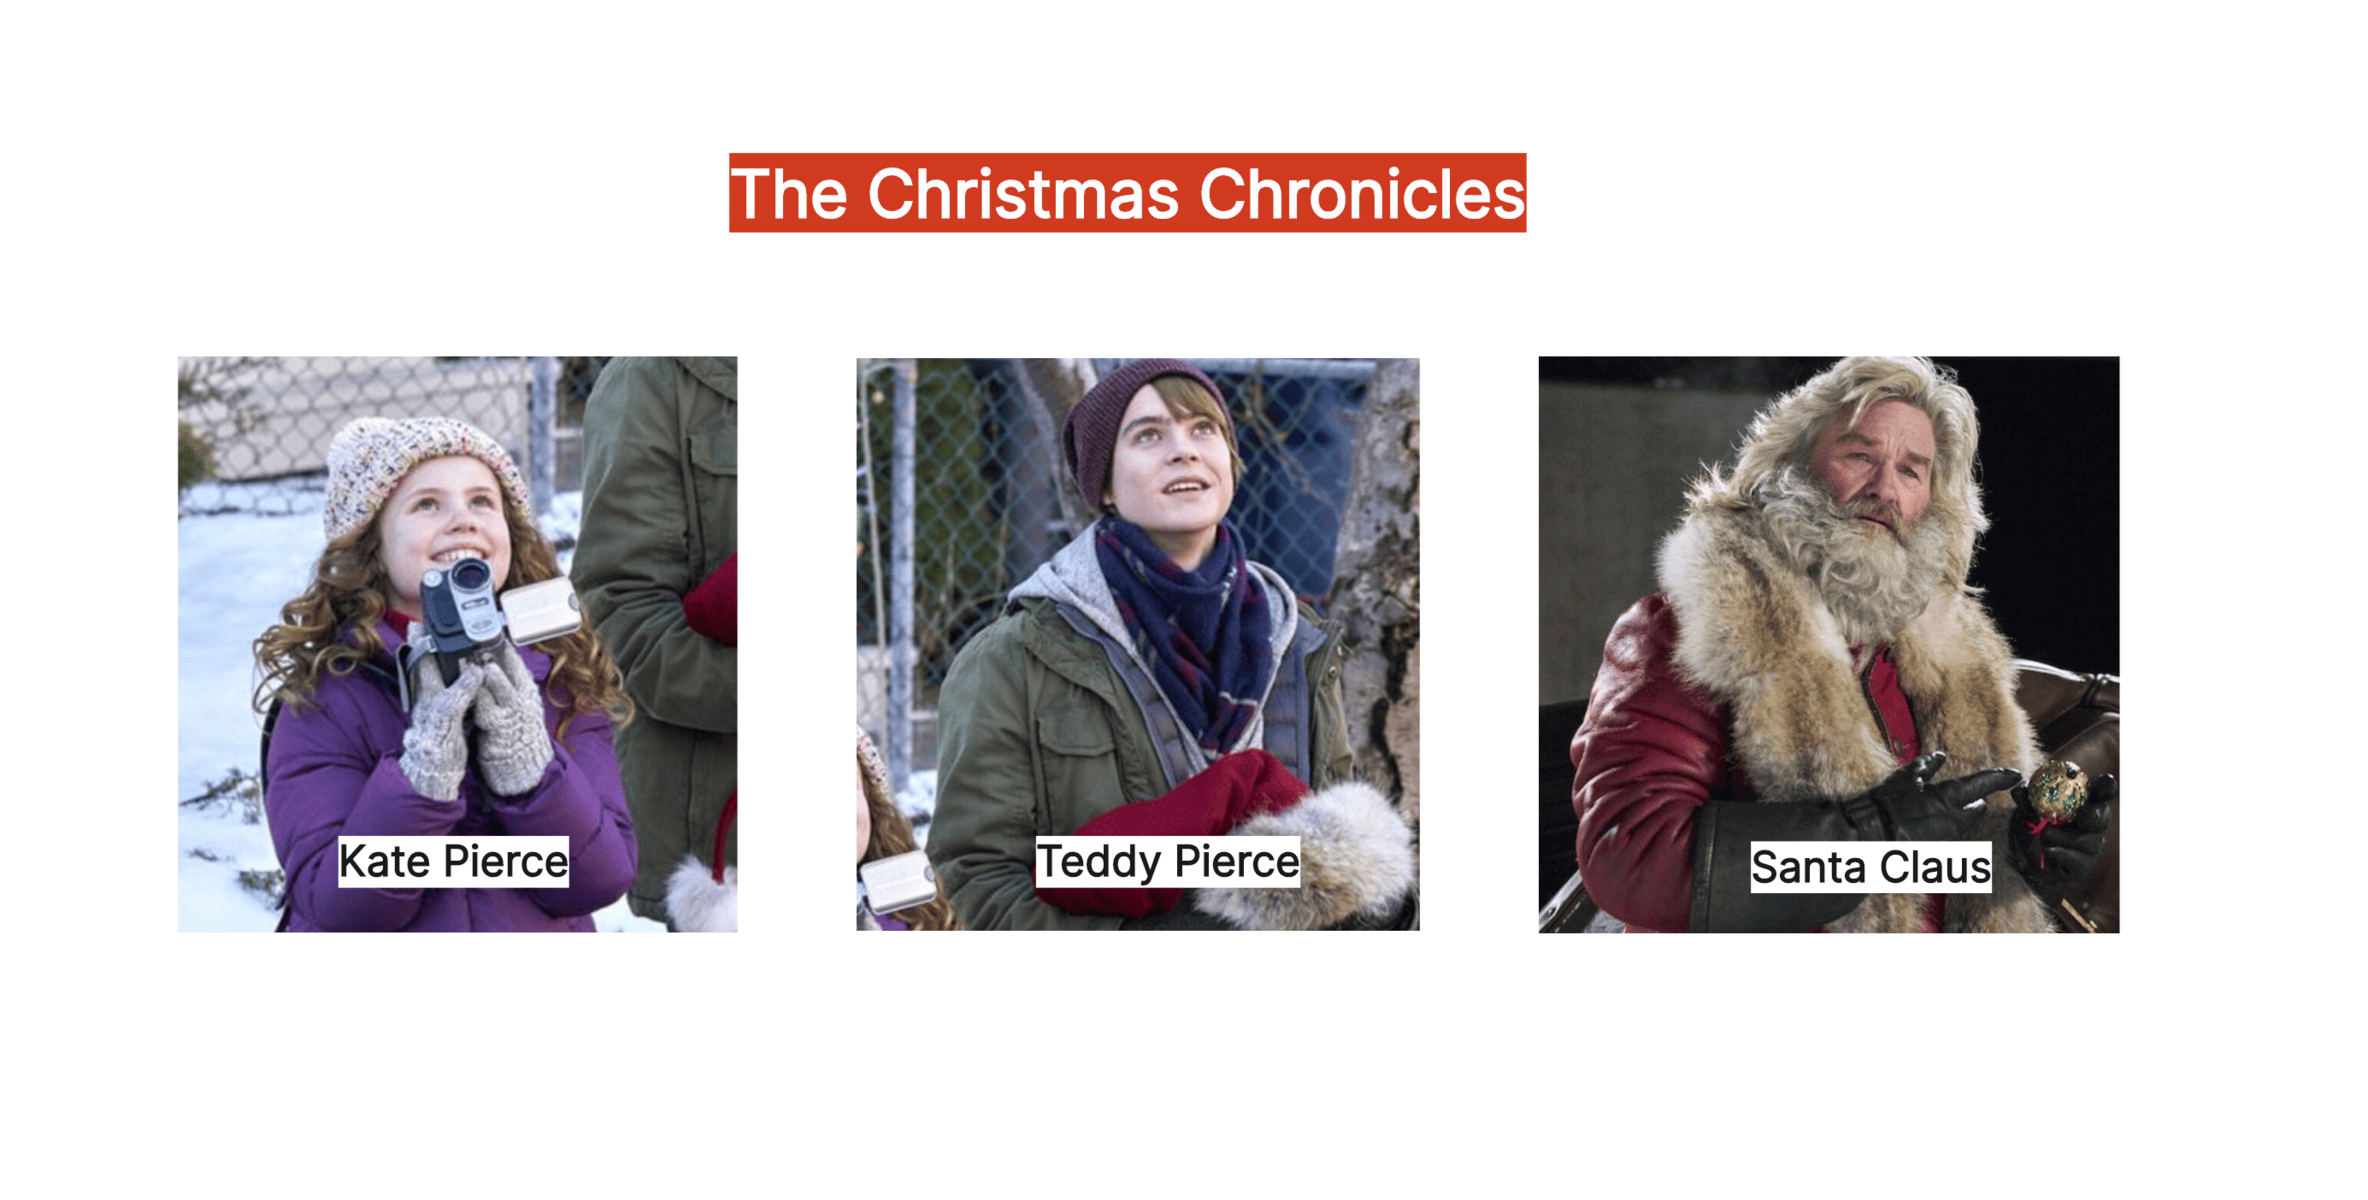 "The Christmas Chronicles" movie club discussion in December